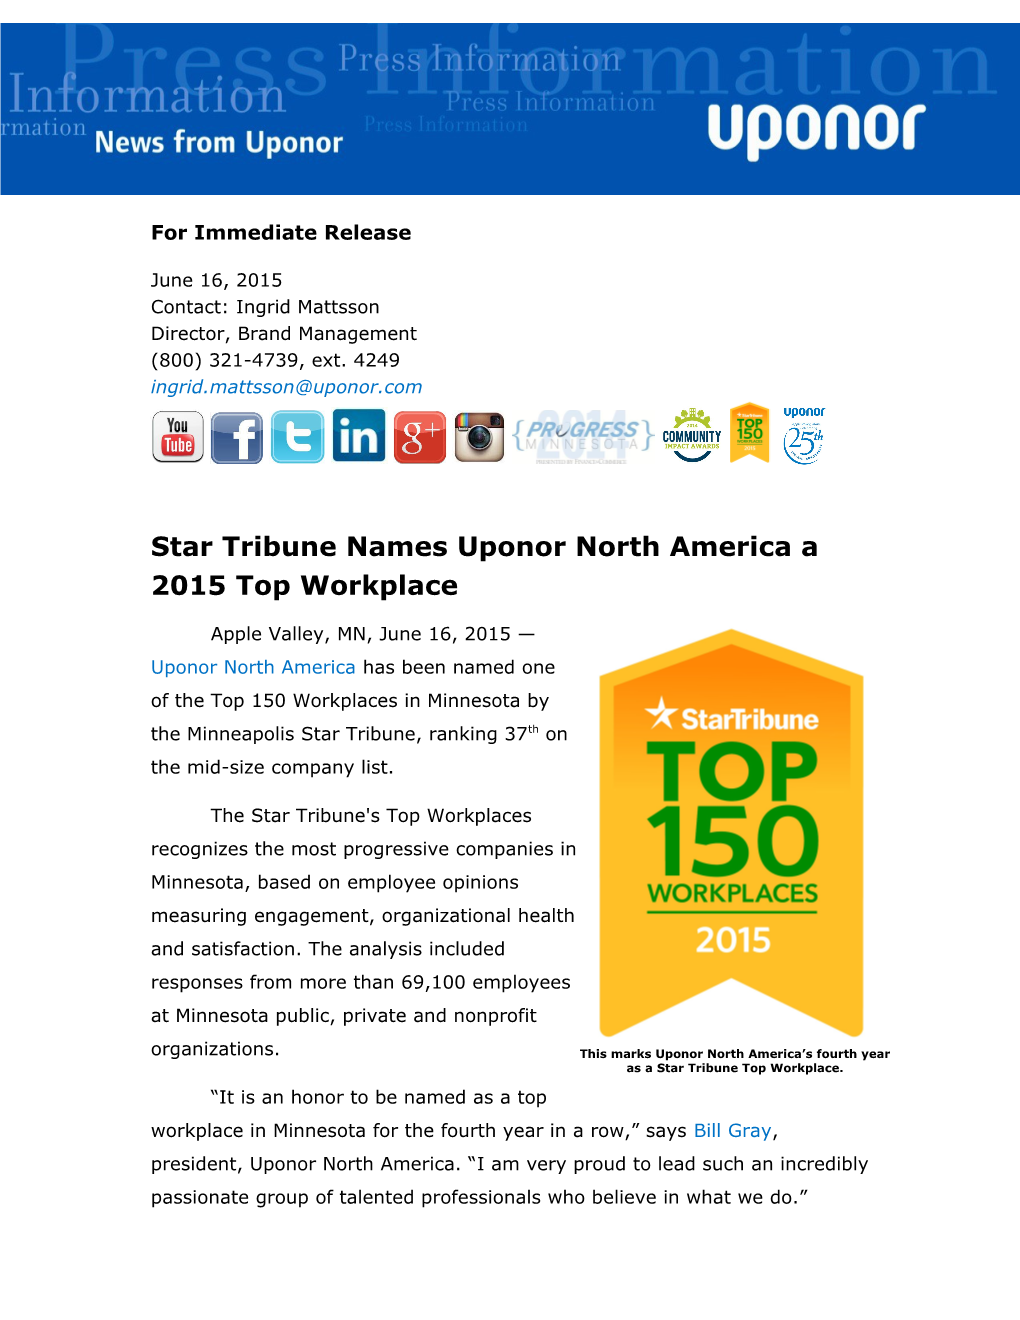 Star Tribune Names Uponor North America a 2015 Top Workplace